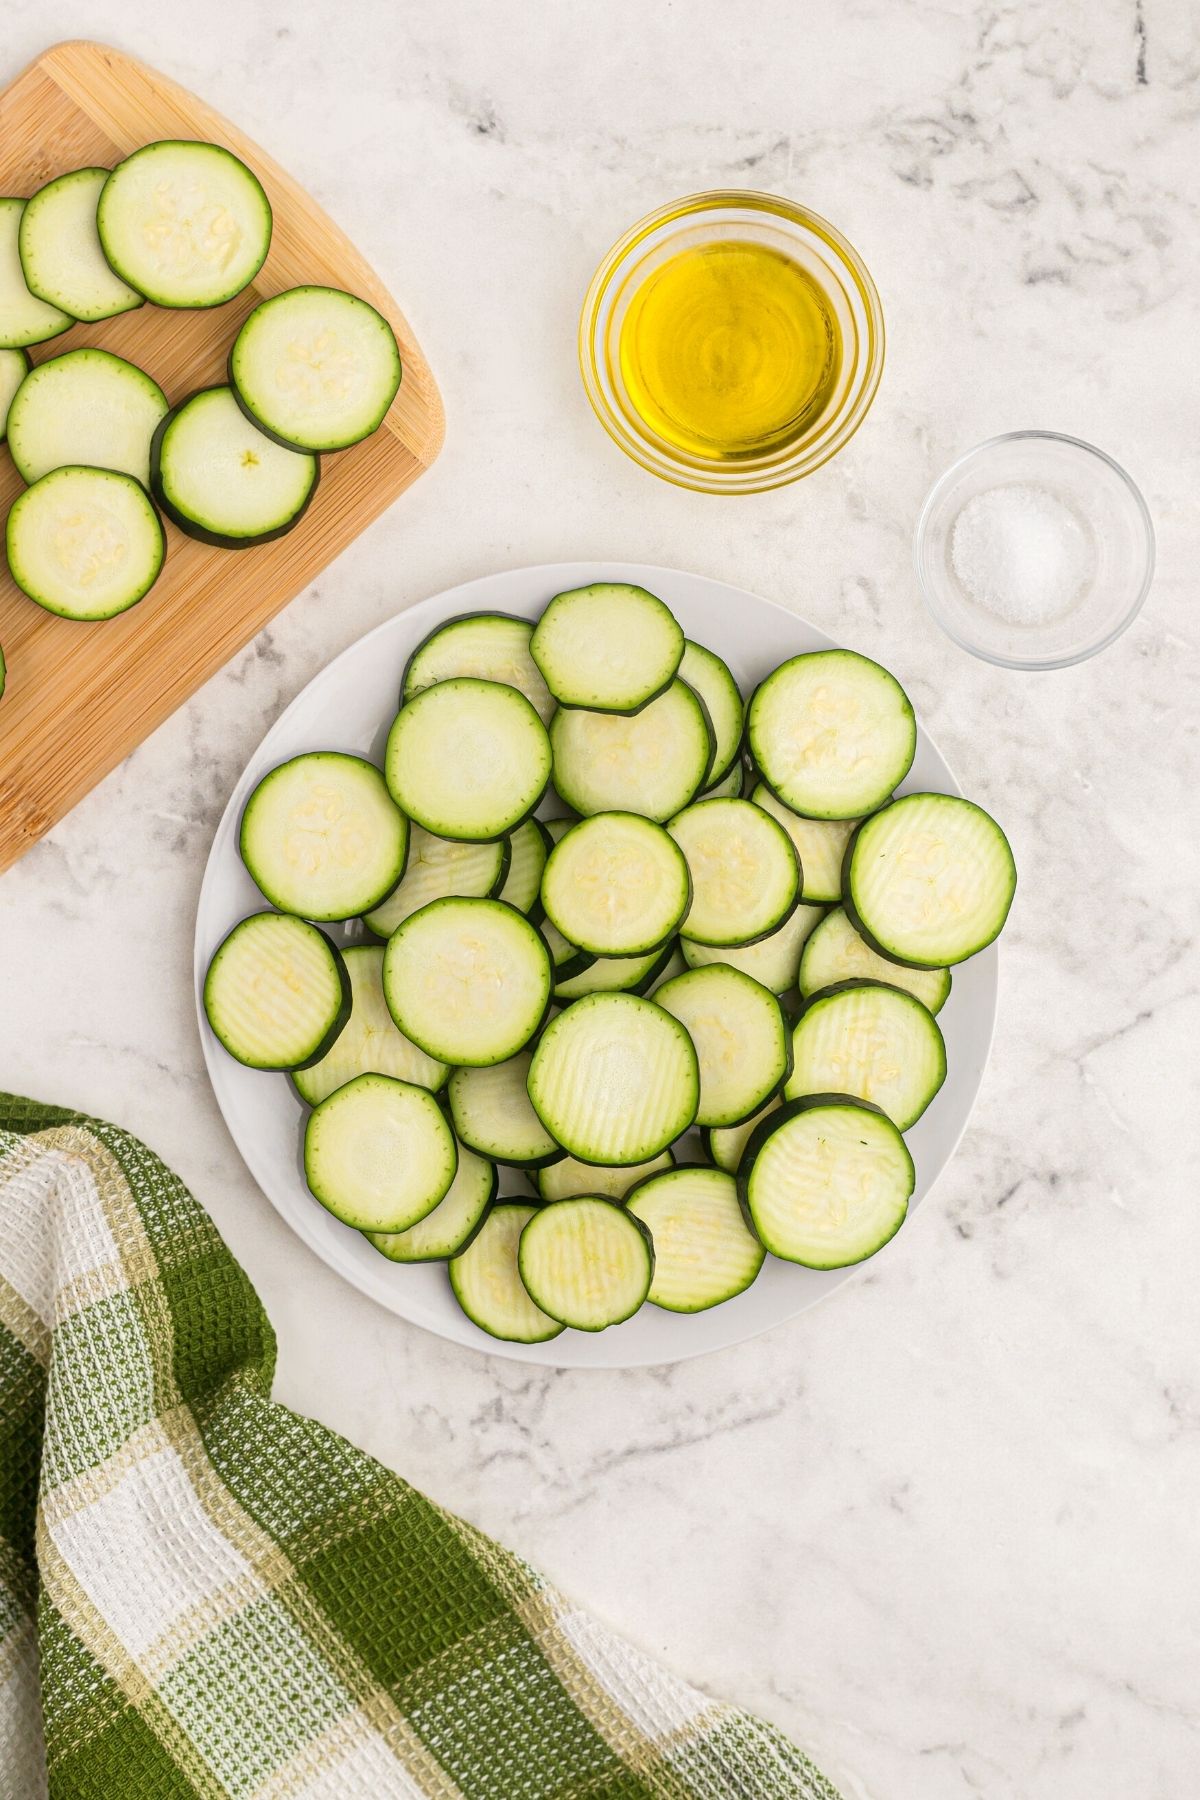 zucchini cut into slices on a wooden cutting board with olive oil and seasonings. 